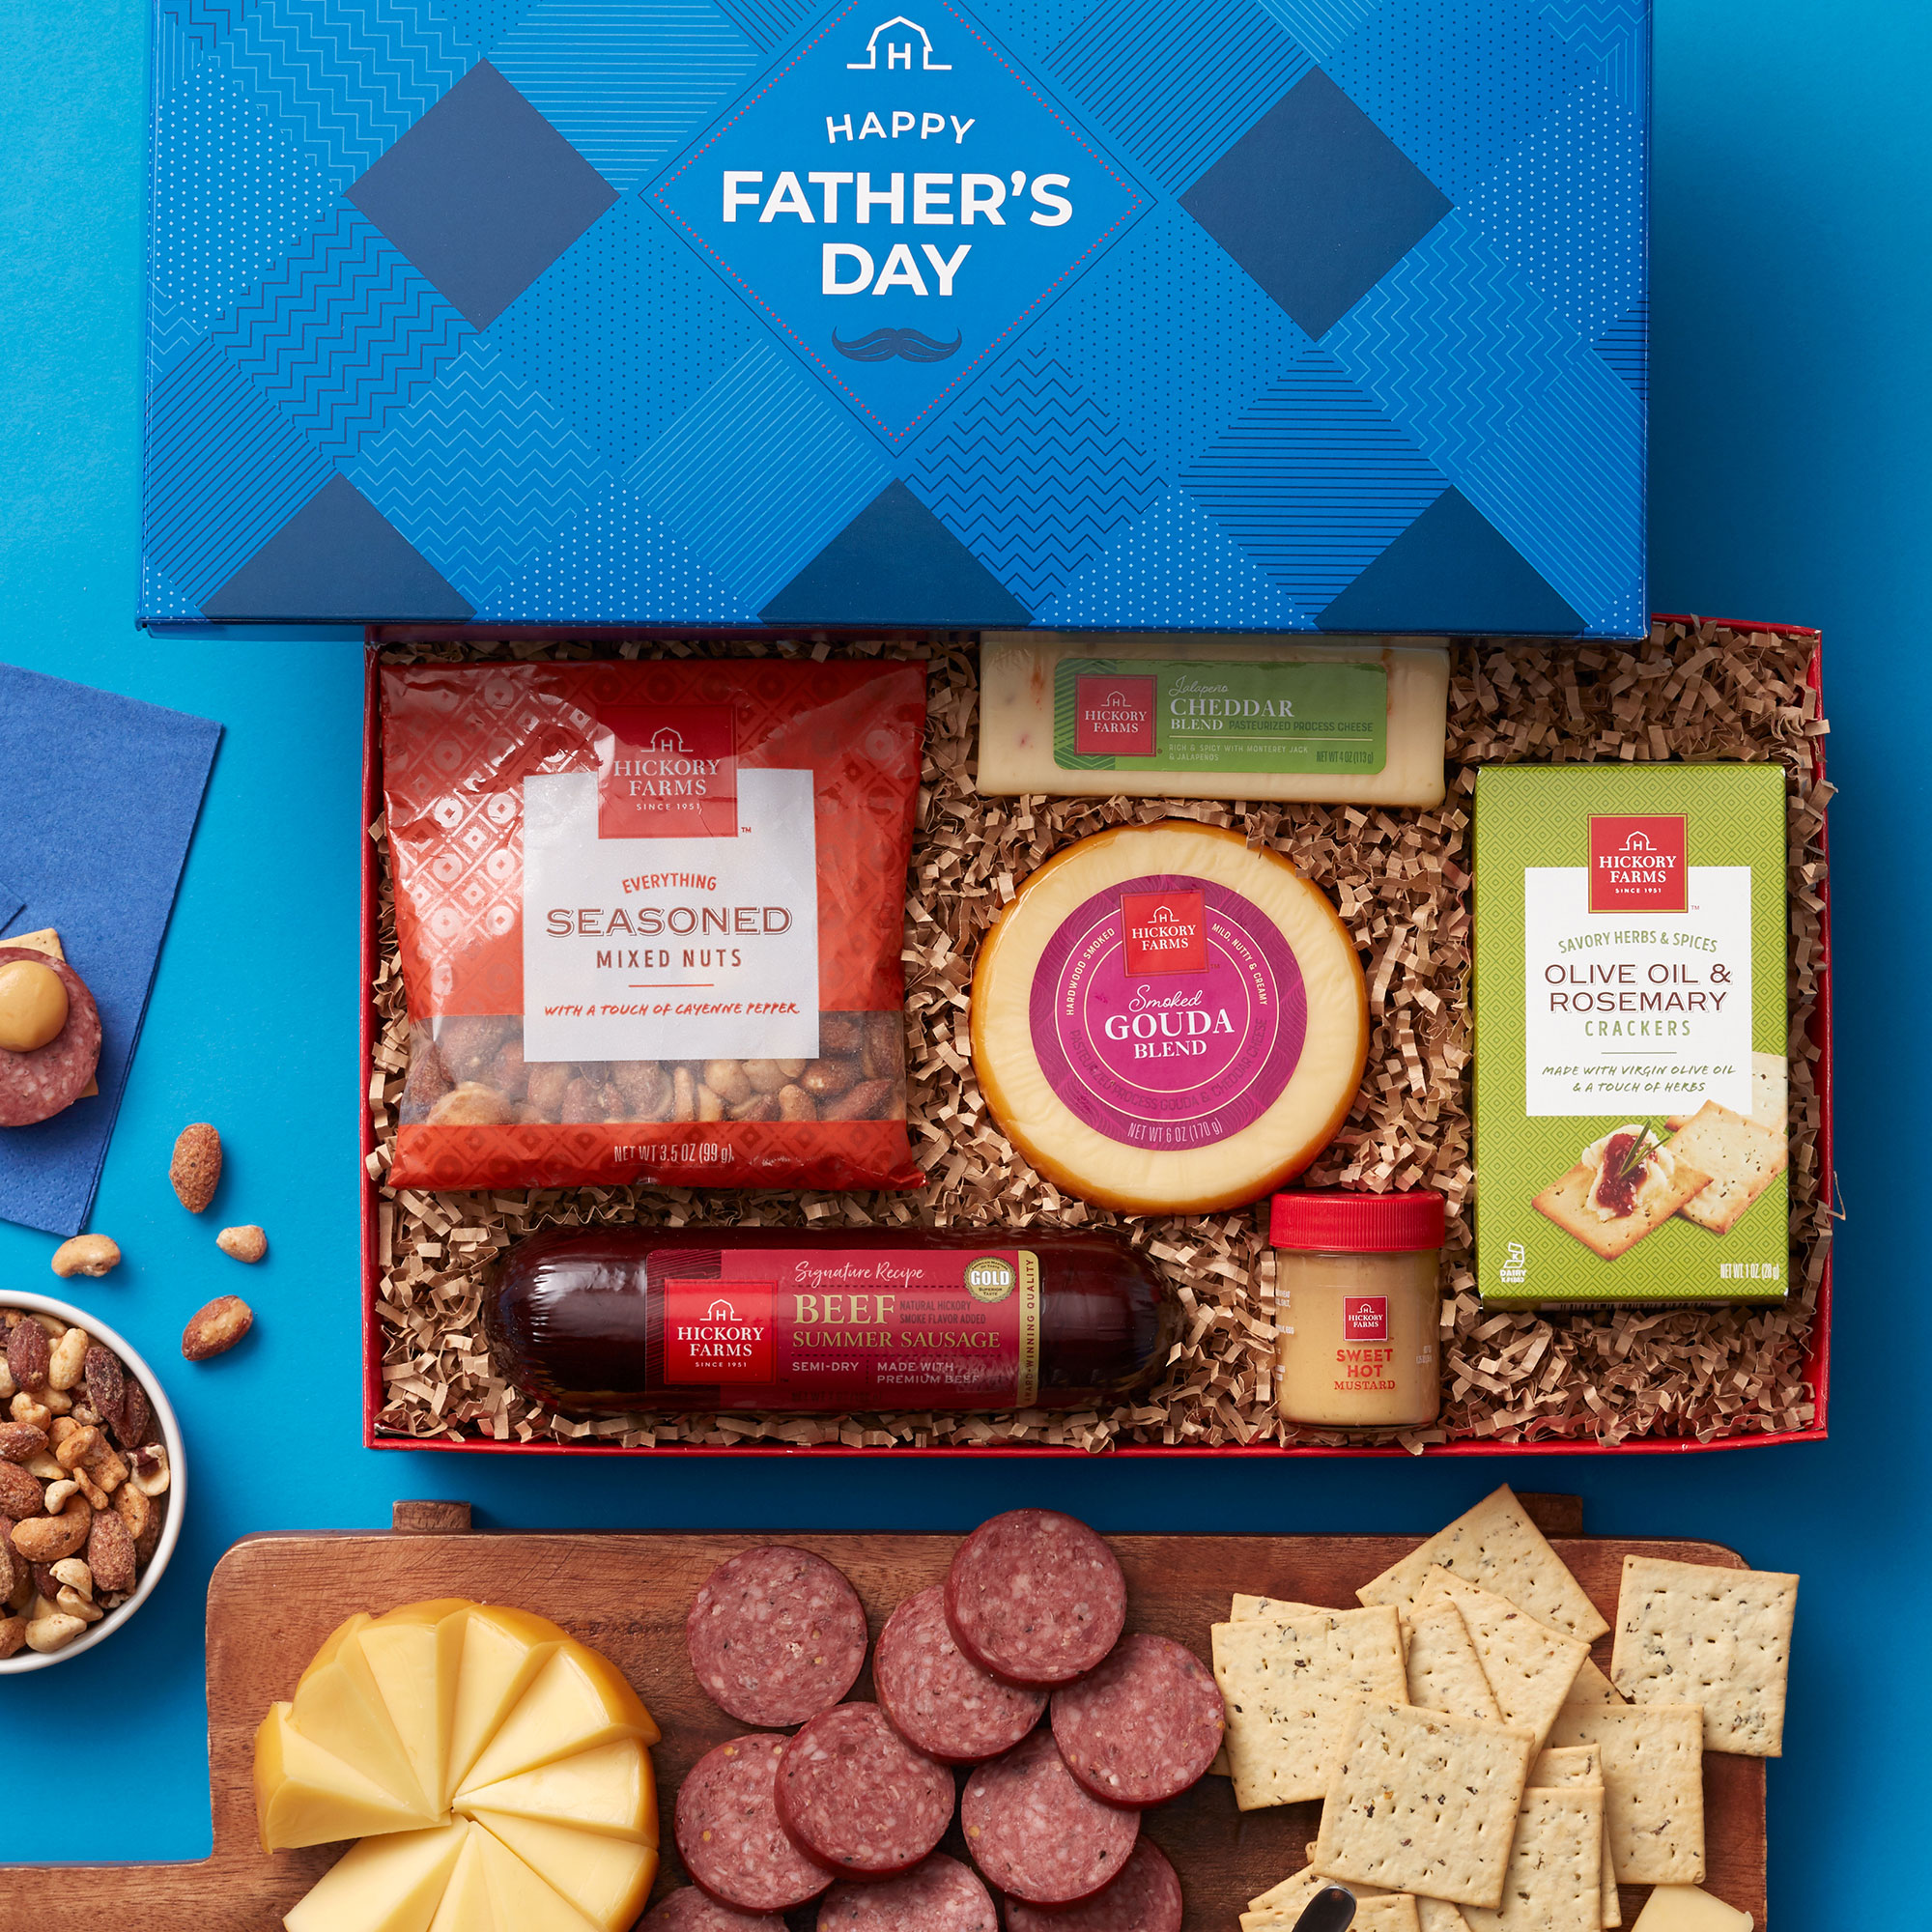 https://www.hickoryfarms.com/on/demandware.static/-/Sites-Web-Master-Catalog/default/dw02f802ba/images/products/fathers-day-favorites-gift-box-006994-1.jpg